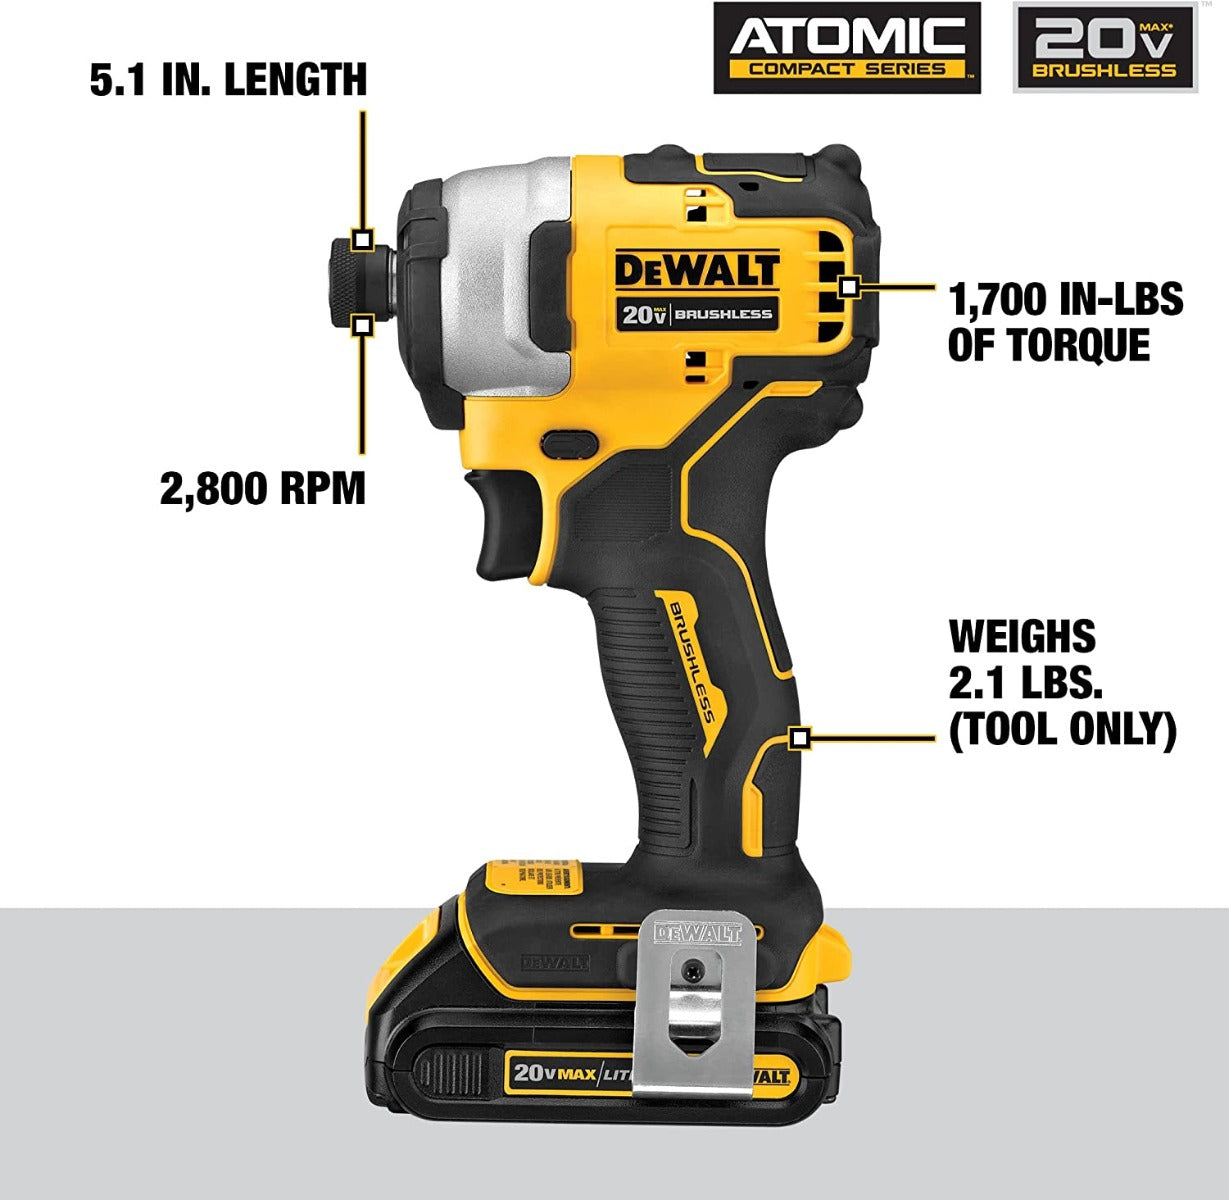 Dewalt DCF809C2 Atomic Compact Series 20V Max Brushless 1/4 In Impact Driver Kits